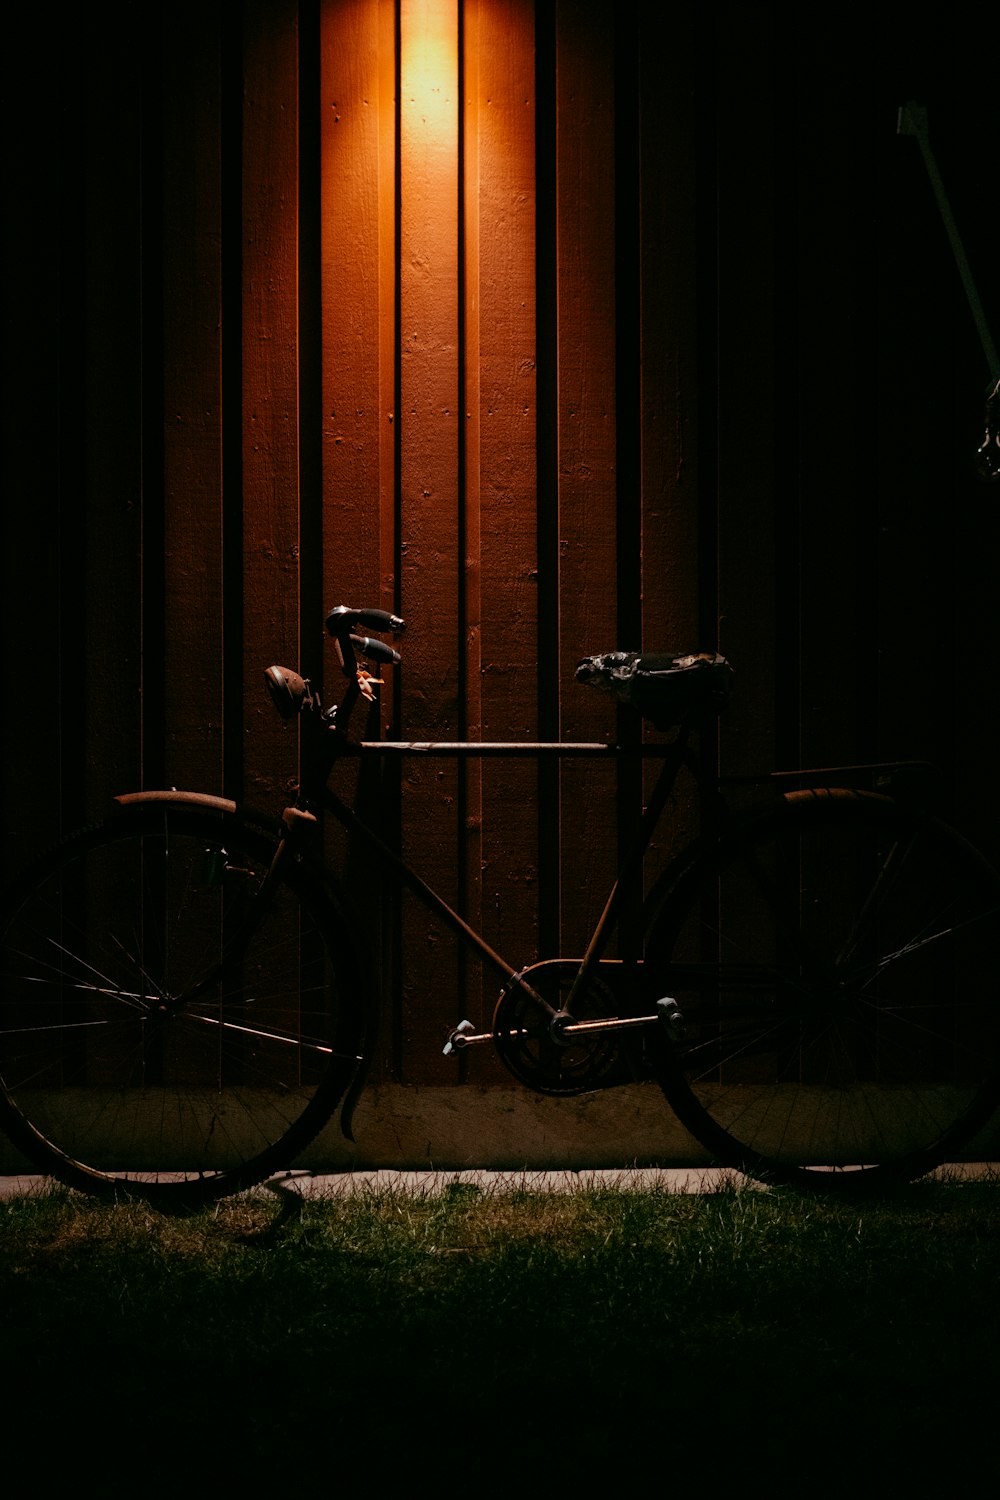 a bike parked in front of a building at night